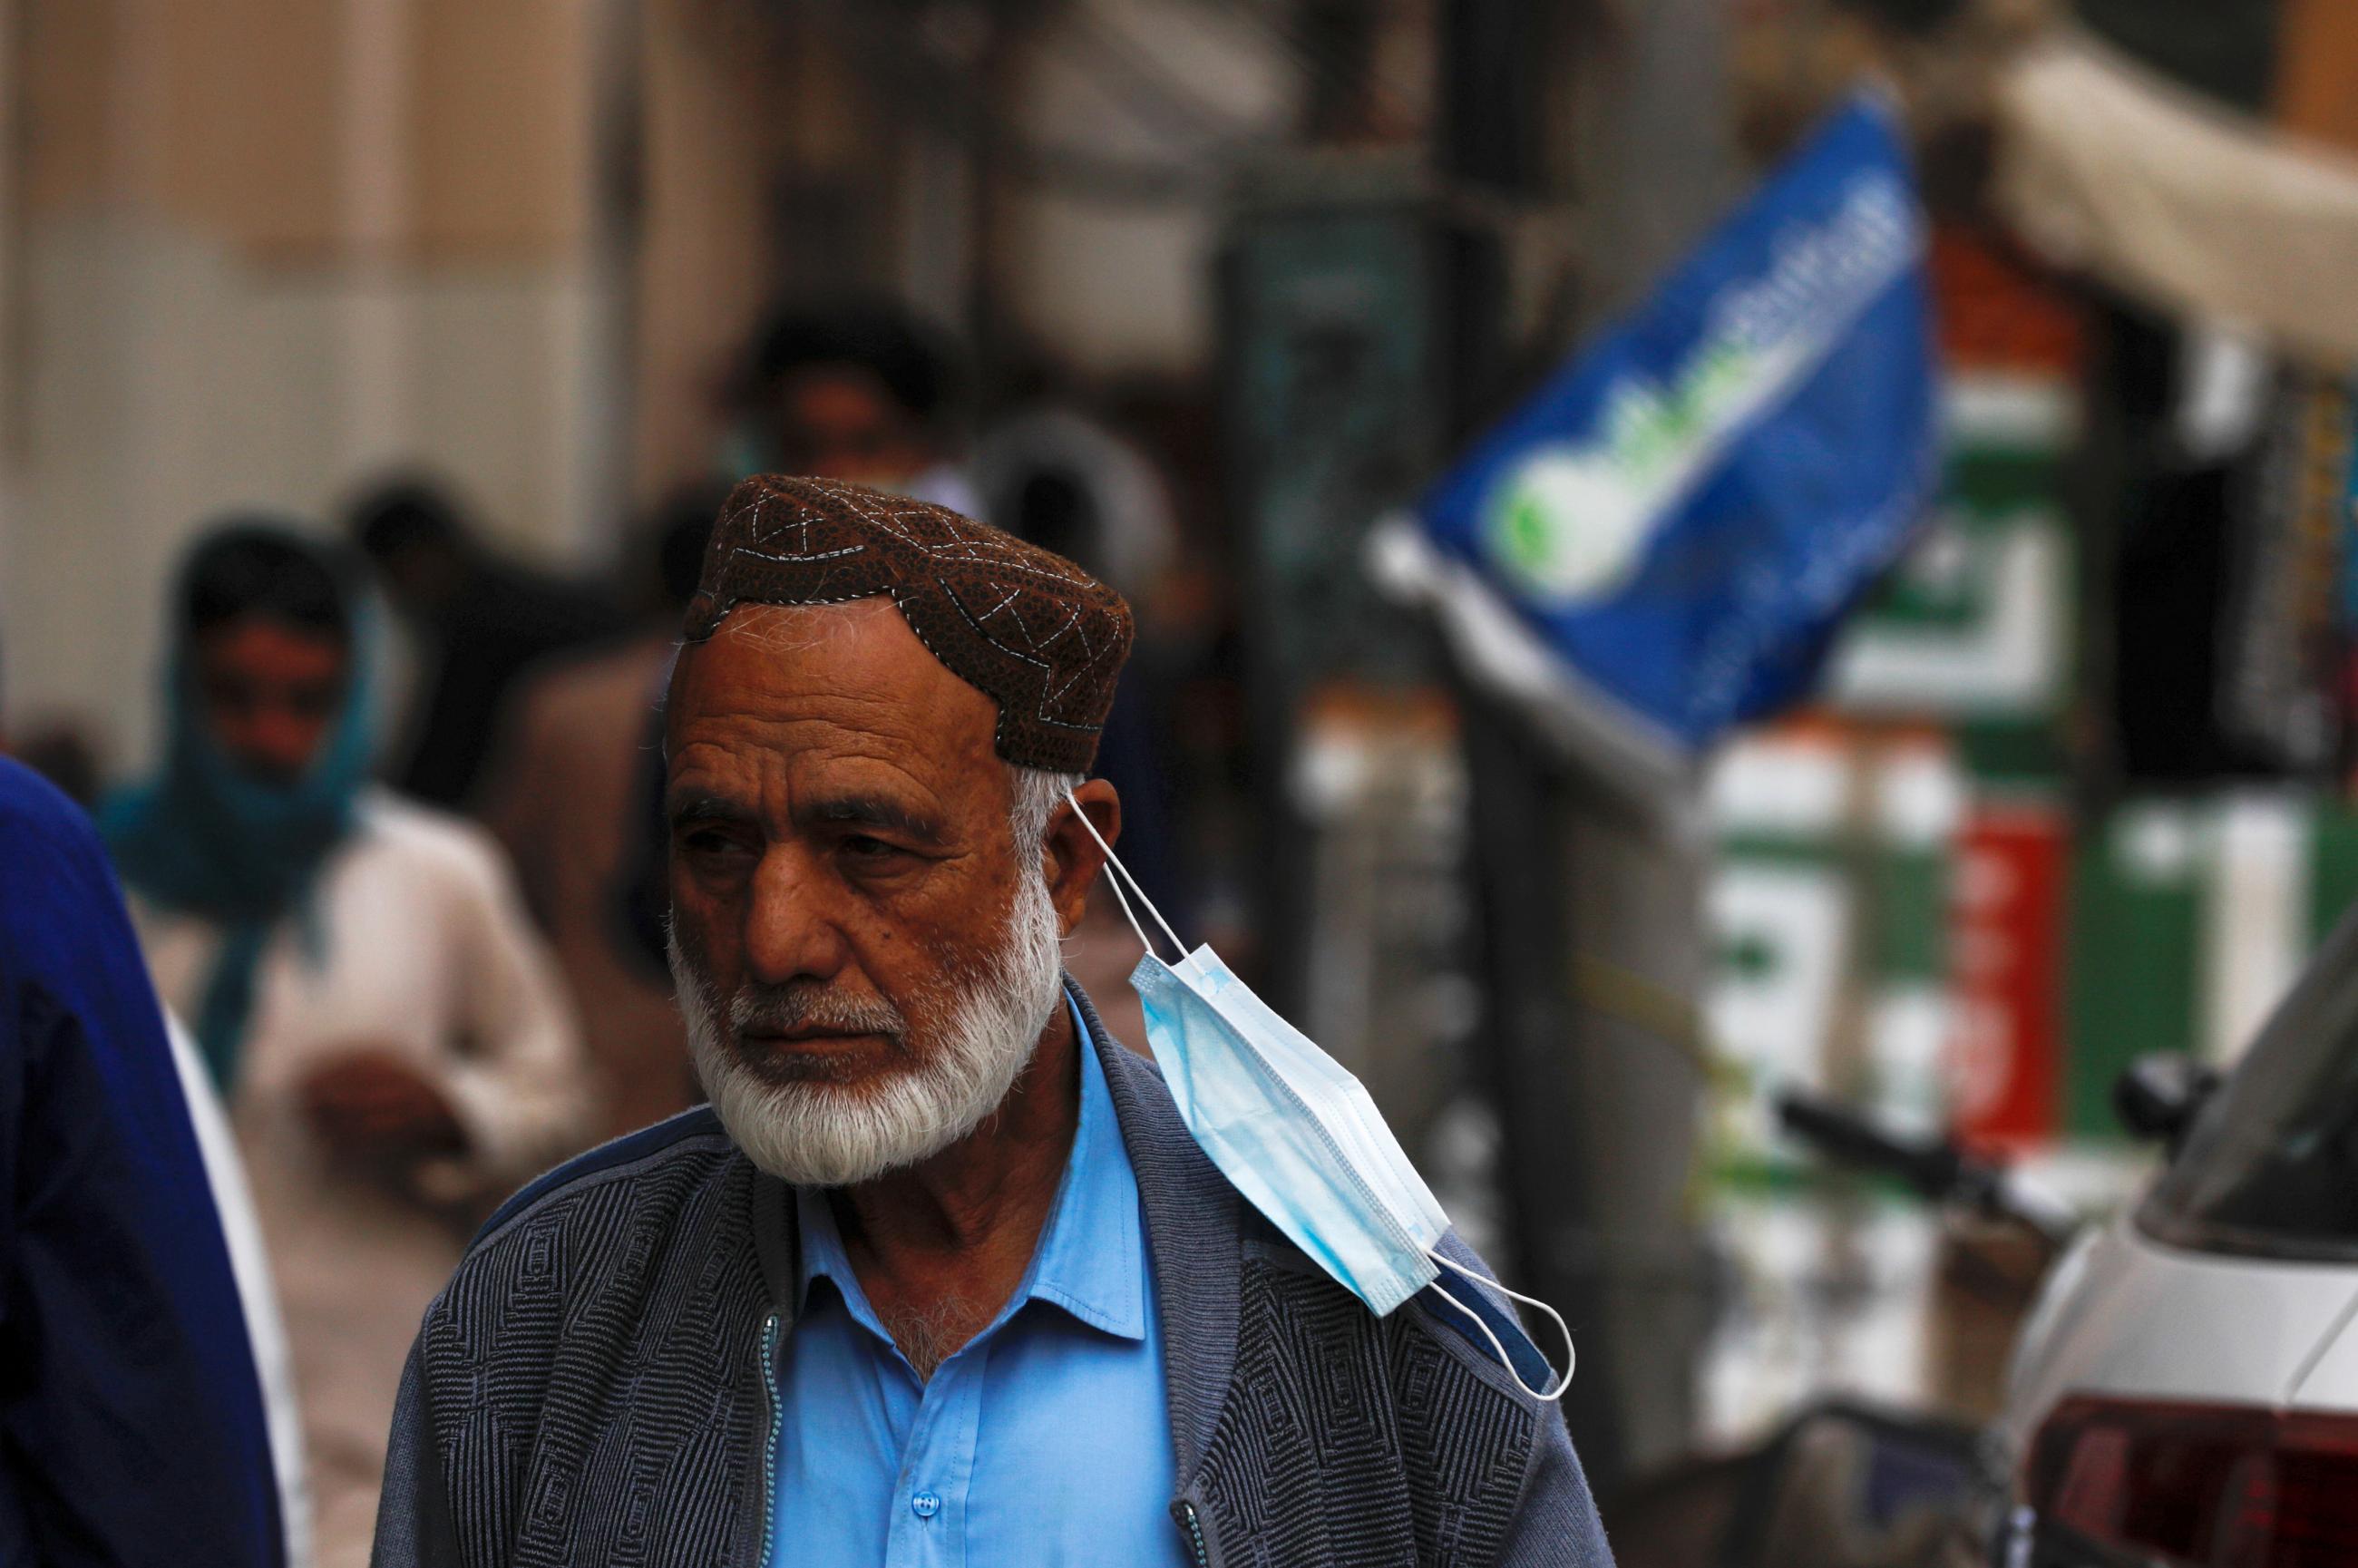 A man with a face mask hanging on his ear walks along a market as the outbreak of the coronavirus disease continues, in Karachi, Pakistan on January 15, 2021.